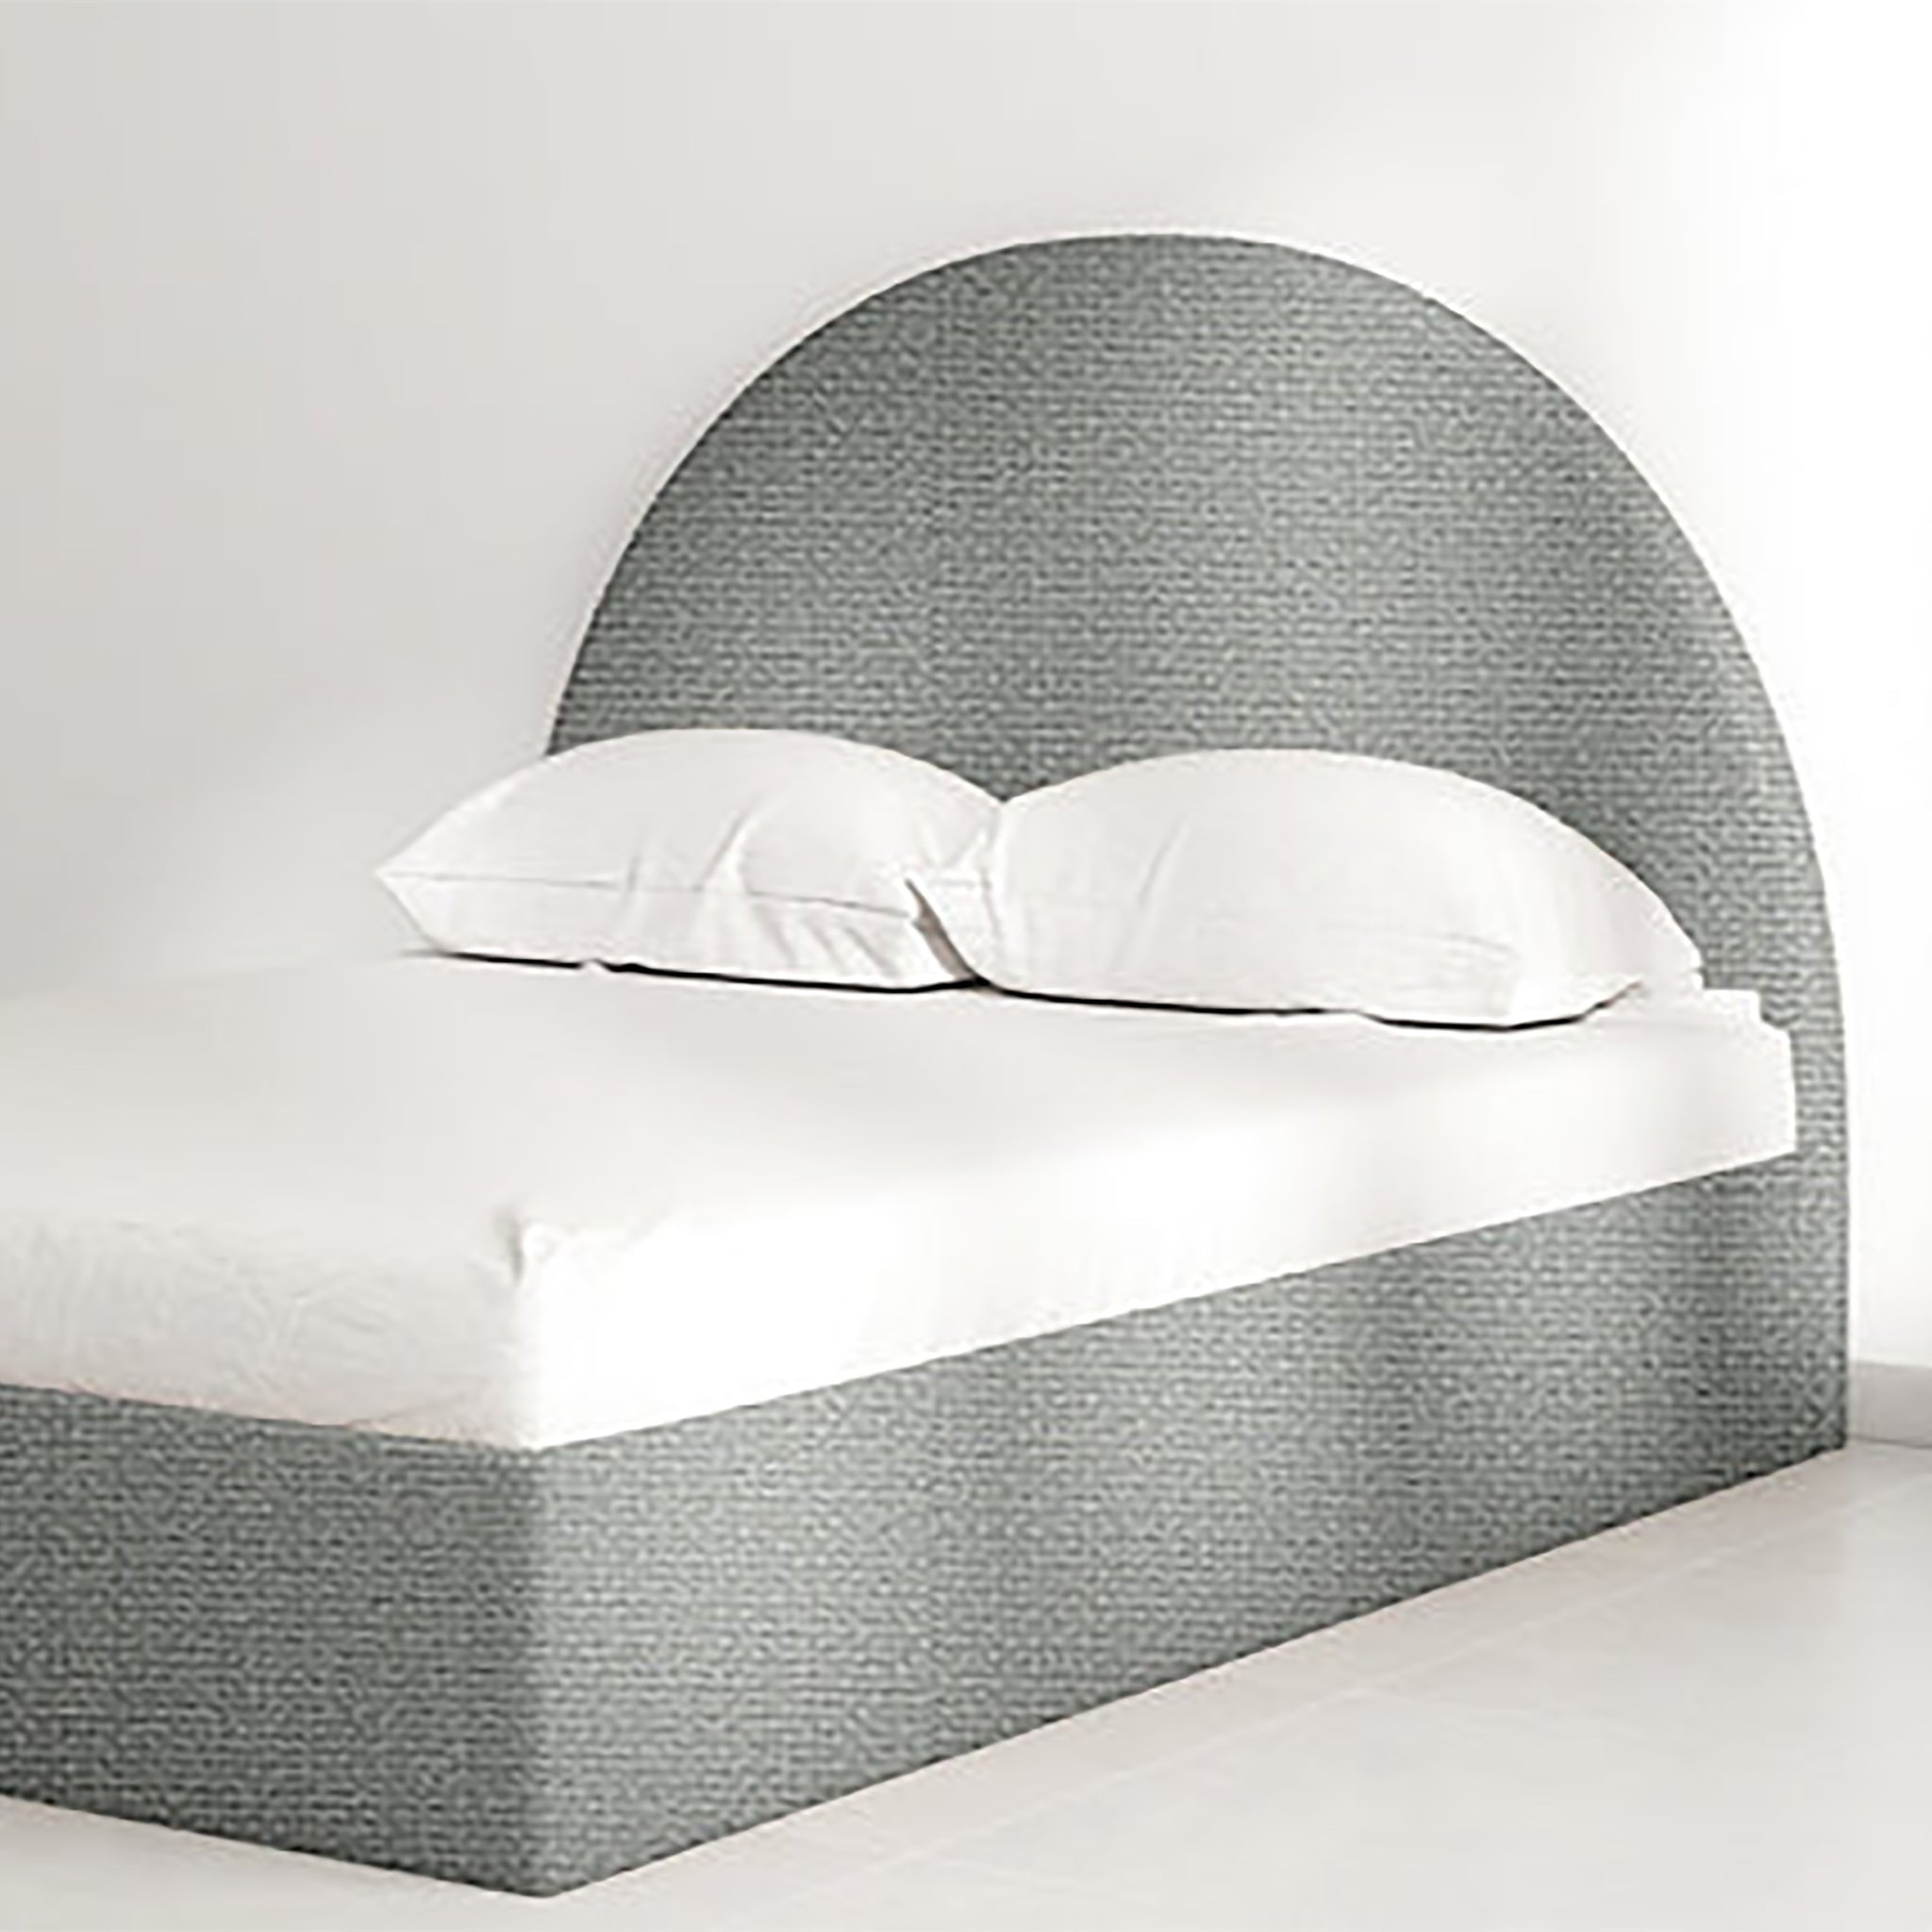 The Archie Bed featuring a luxurious curved headboard in textured grey upholstery. Modern and compact design, perfect for tight spaces, master bedrooms, and guest rooms. Stylish and space-saving furniture for contemporary living.